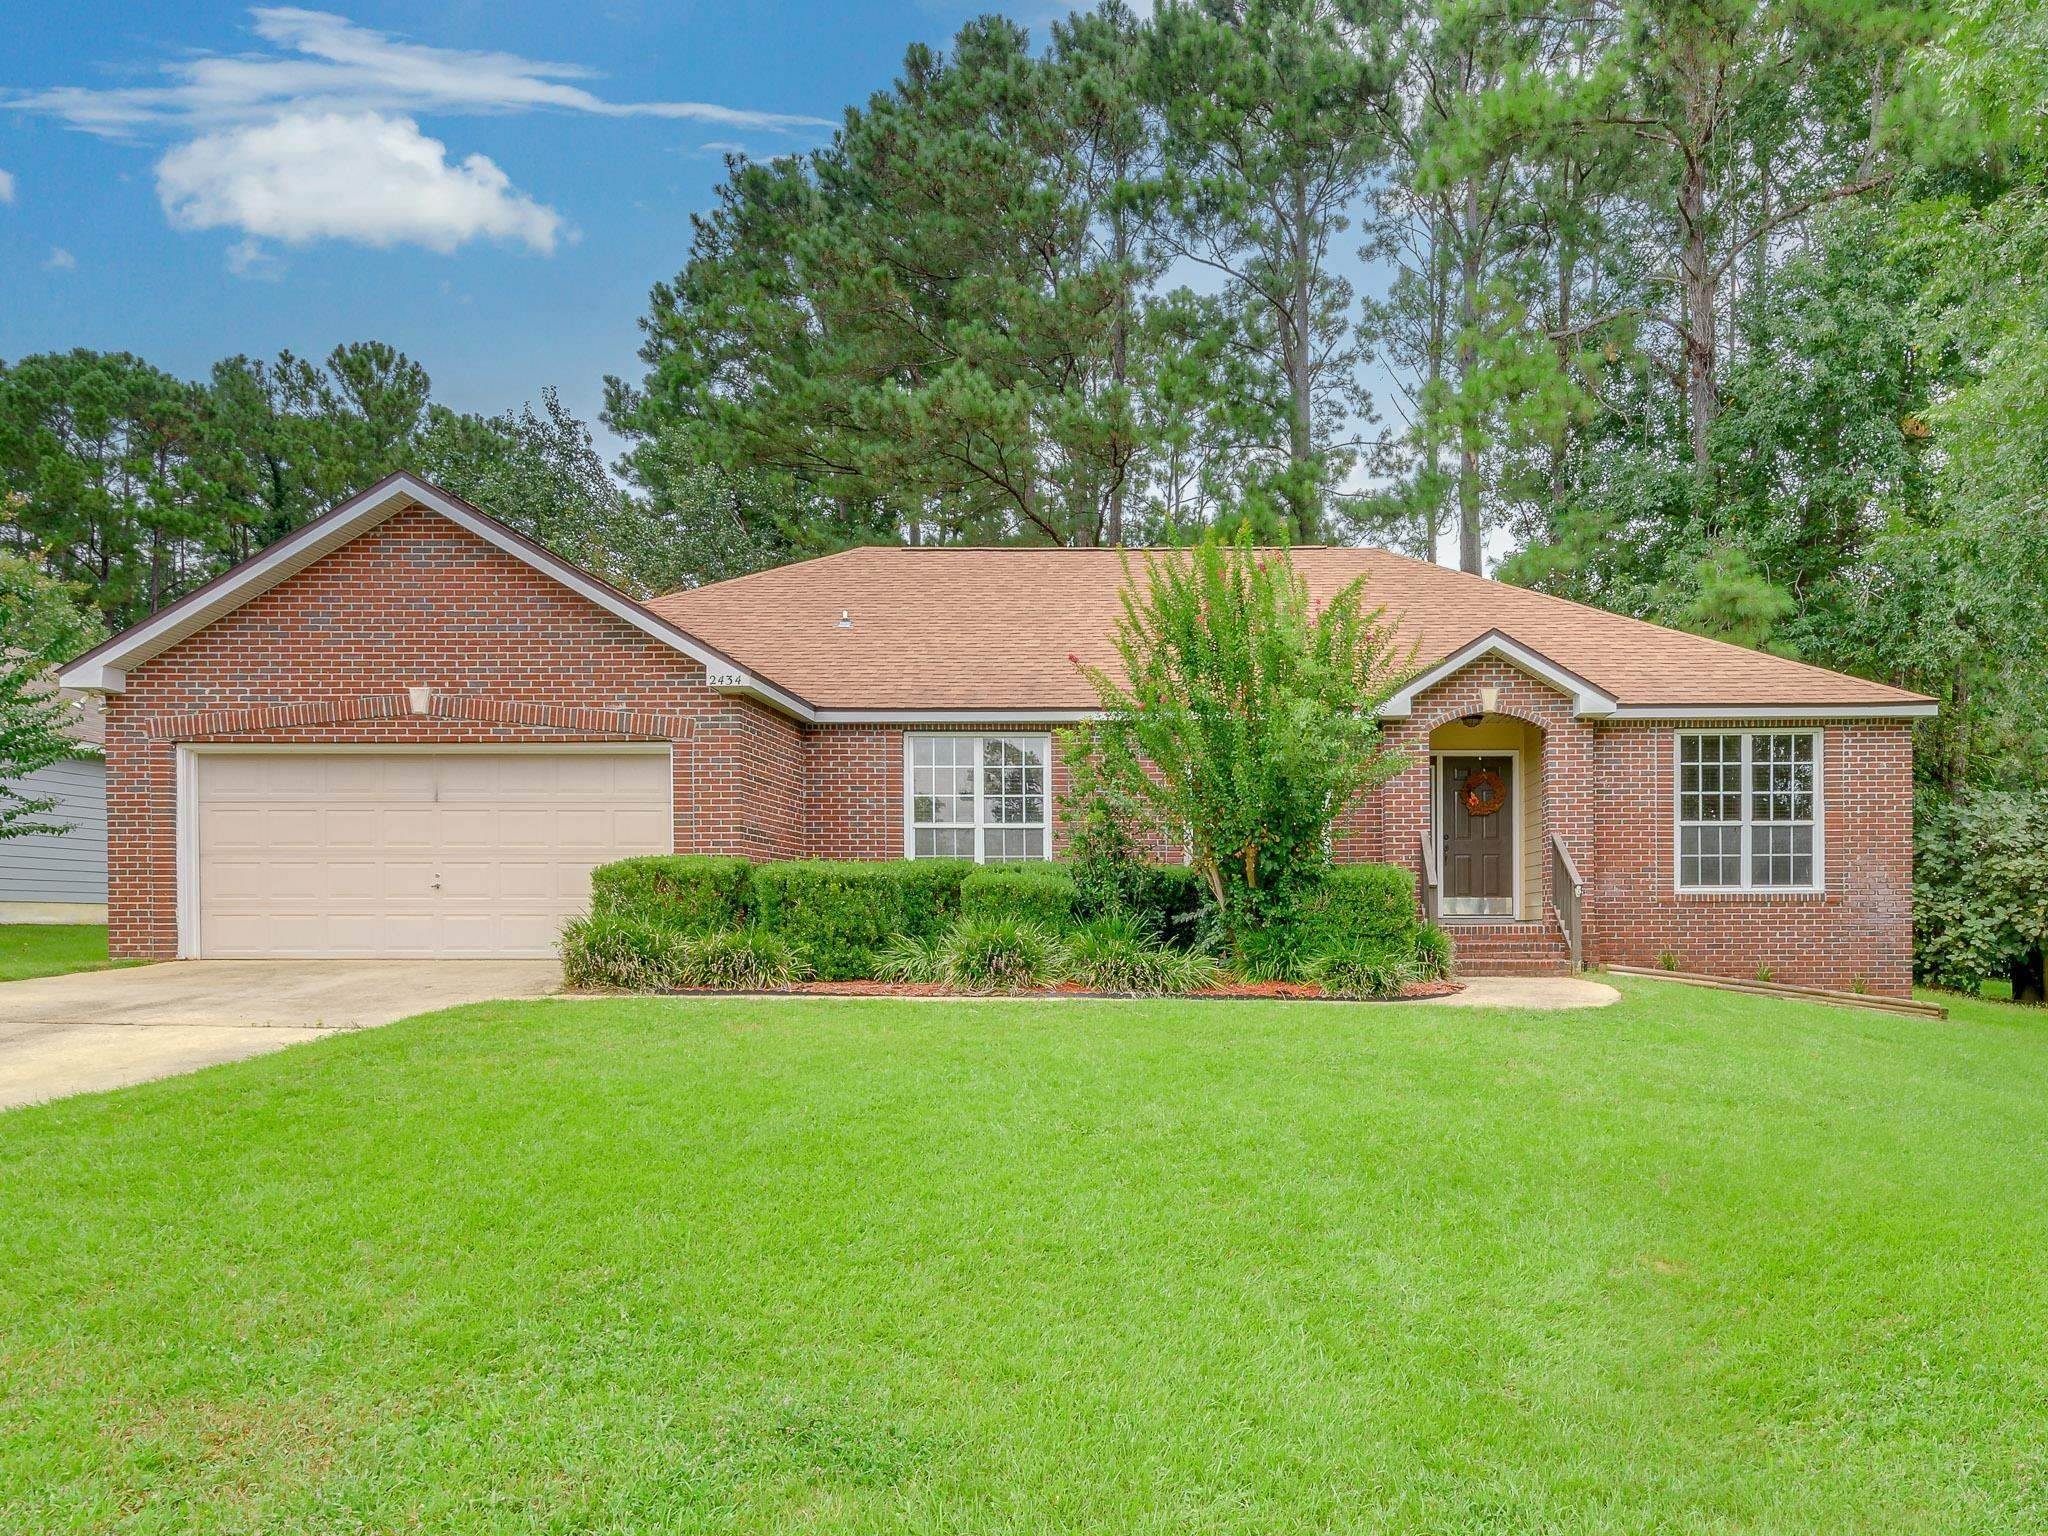 Single Family for Sale at Tallahassee, FL 32308